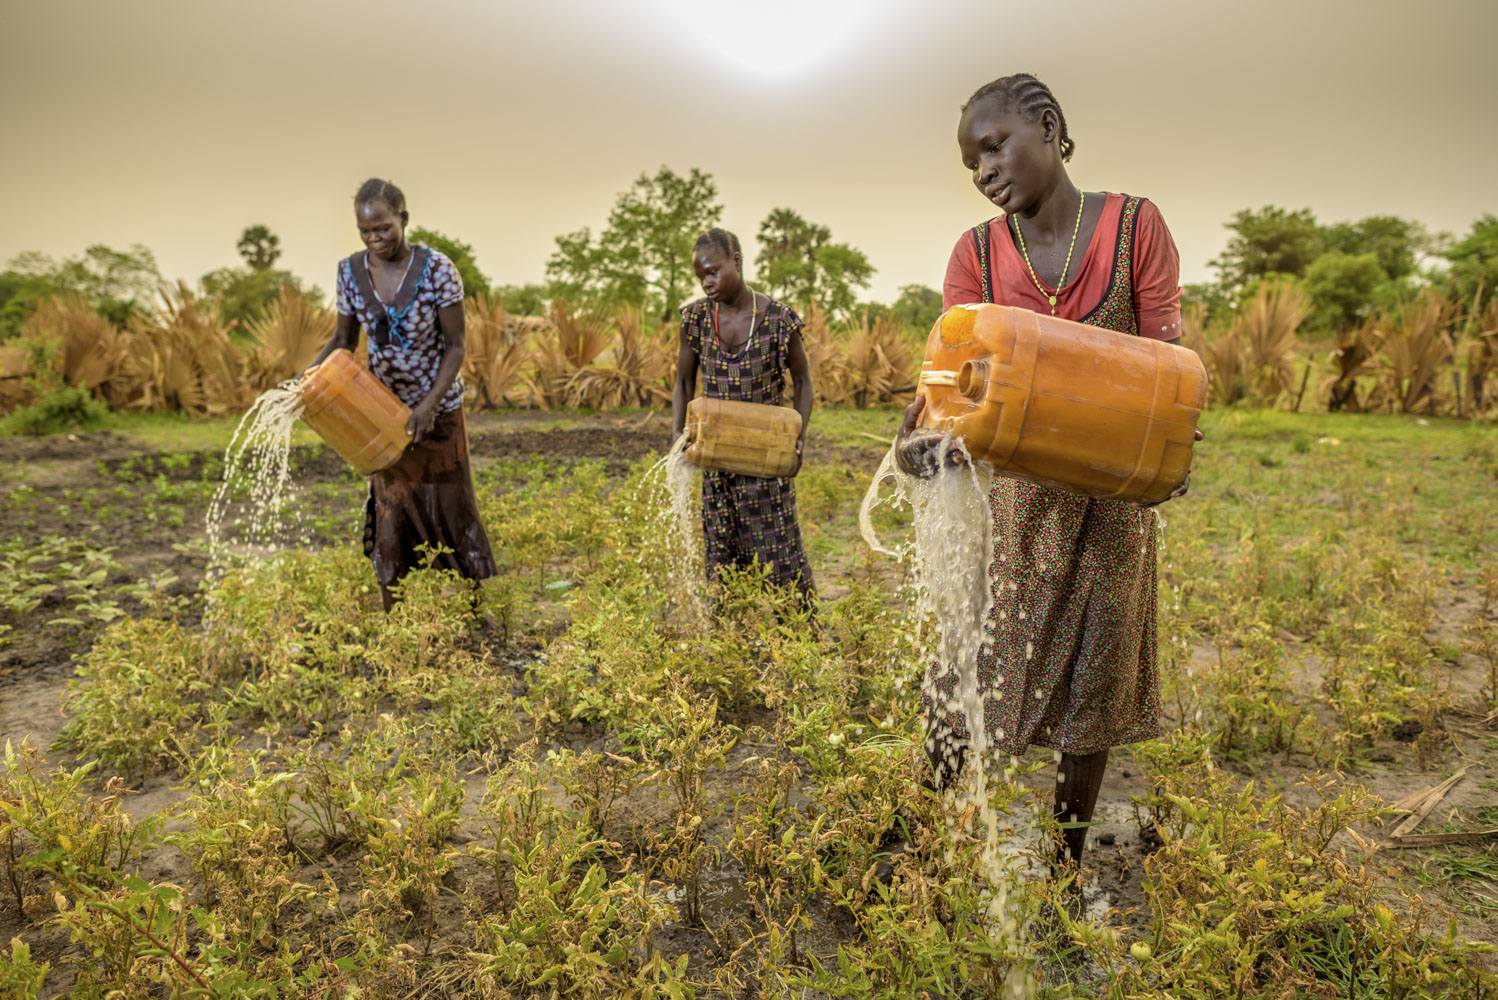 Moms water their vegetable gardens early in a Saturday morning in Kuajok, Warrup State, South Sudan.